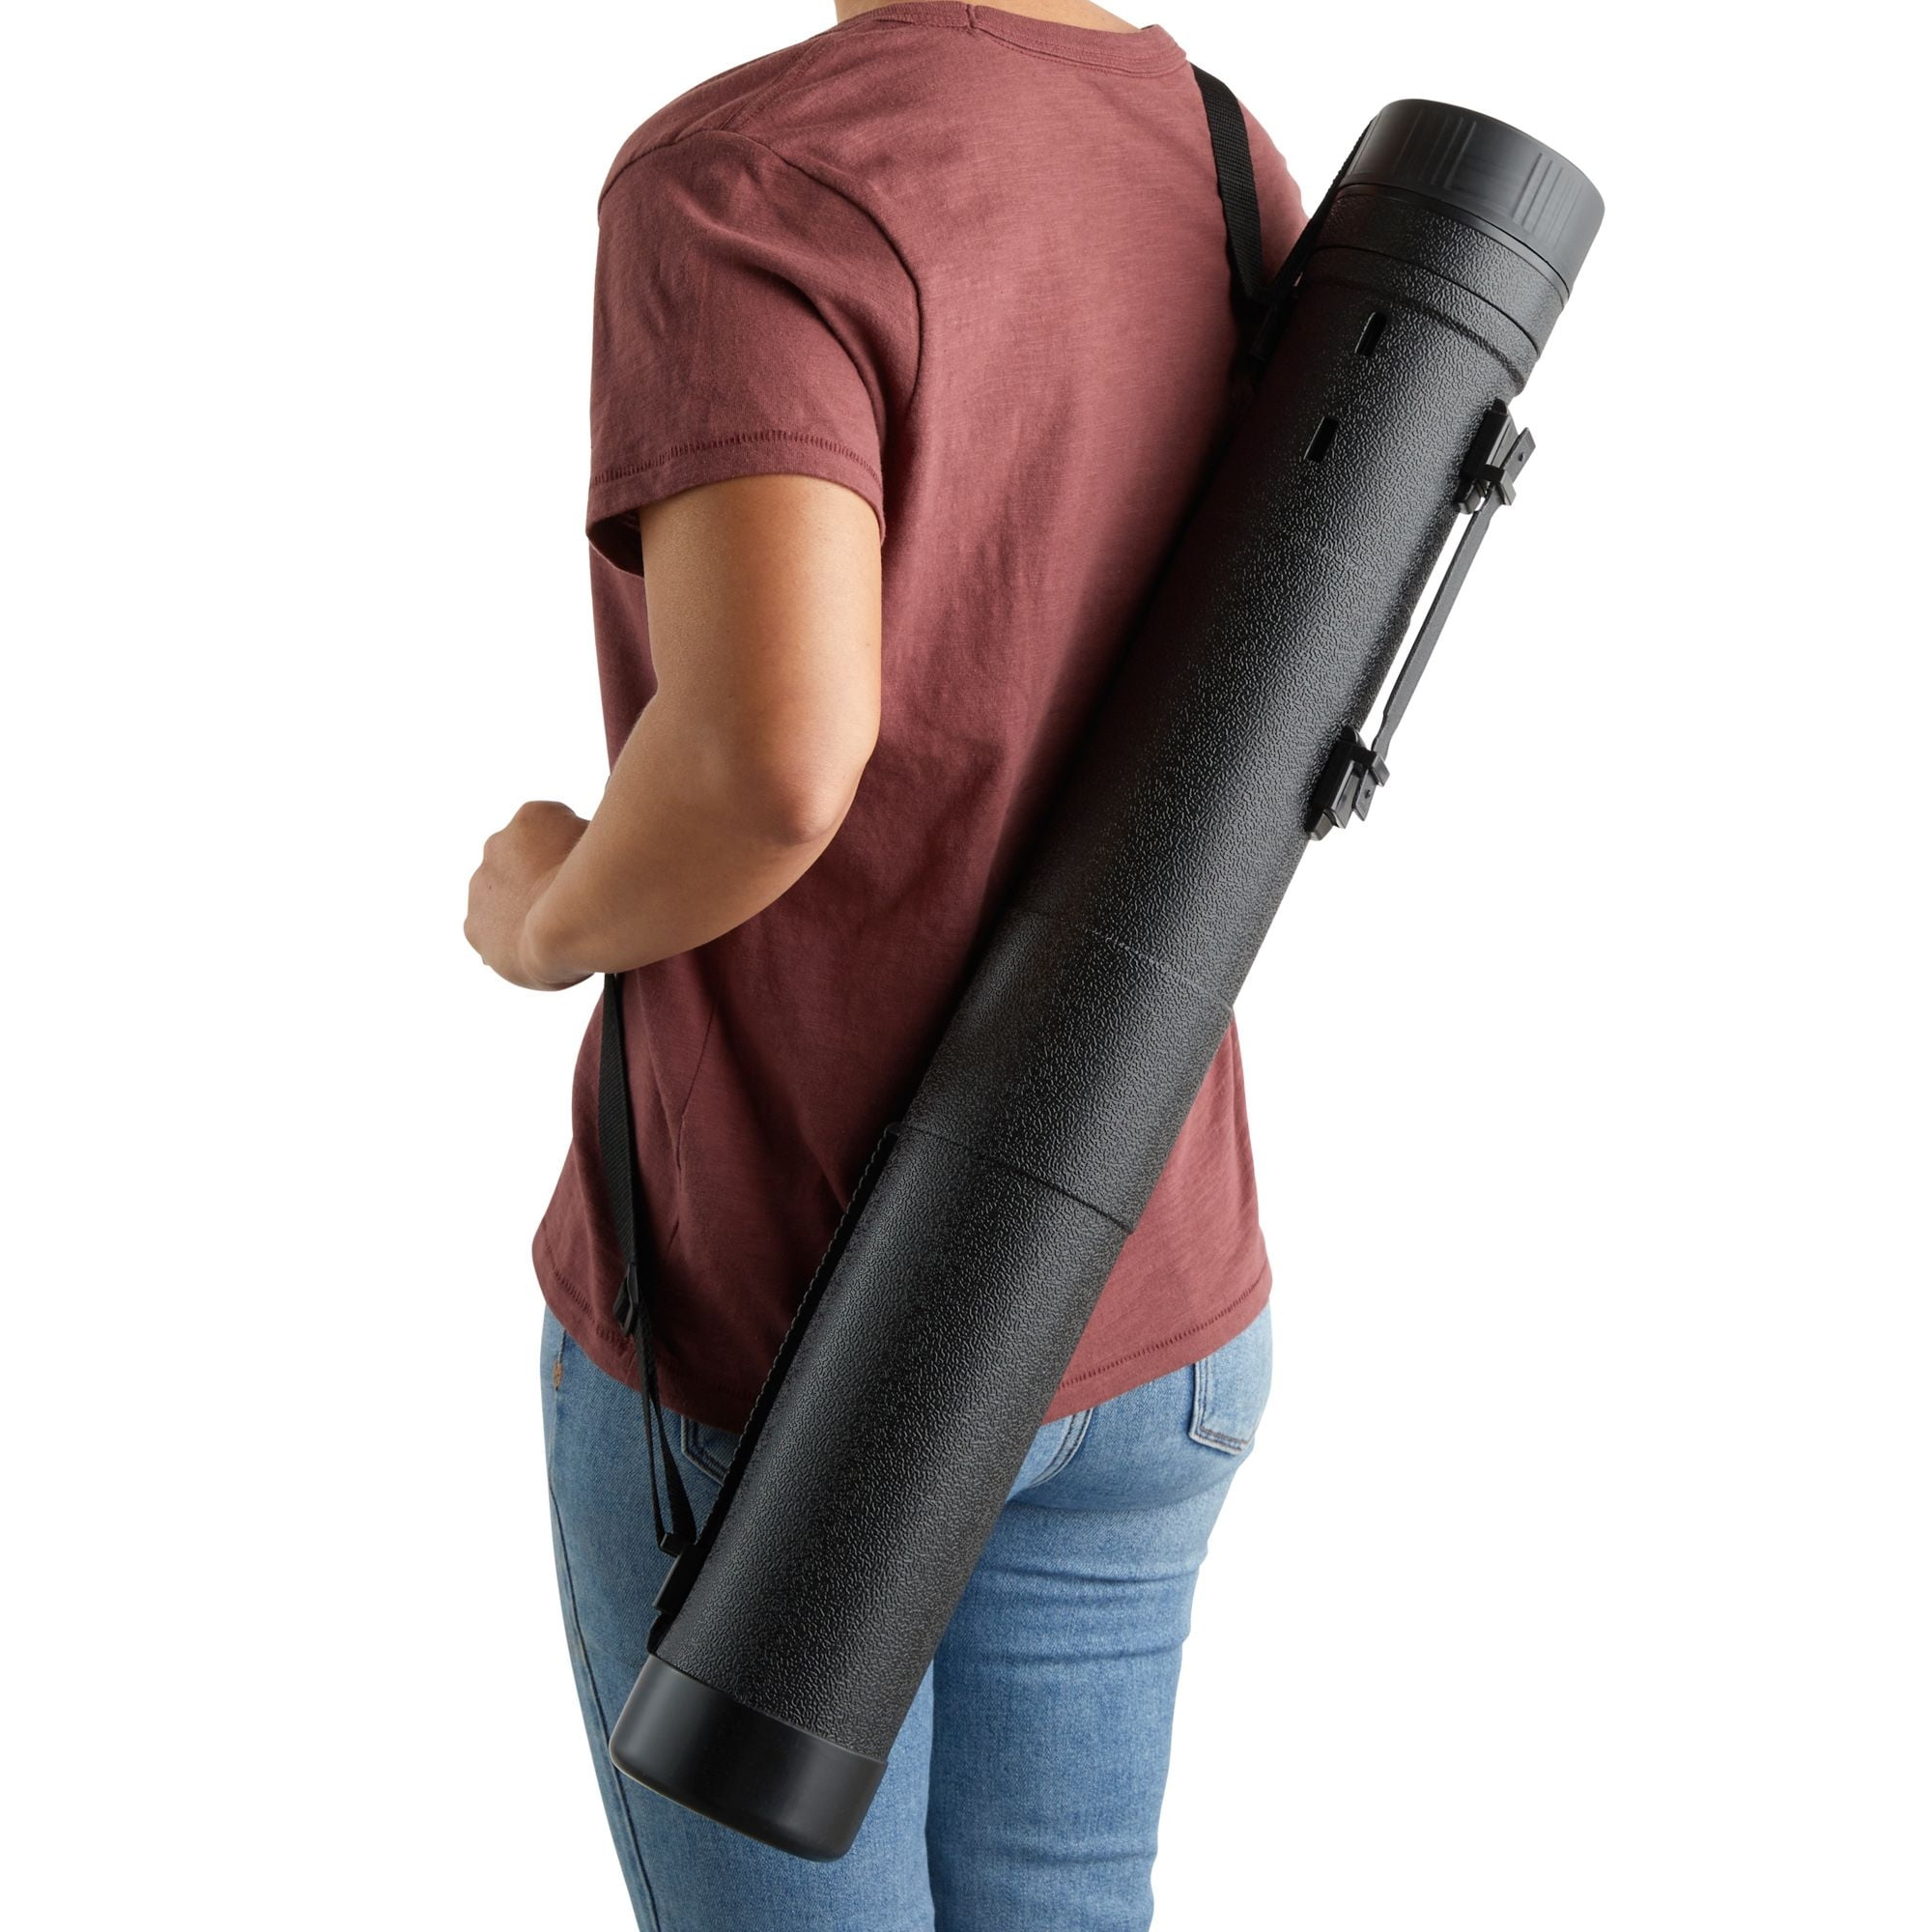 Poster Tube Carry Case Expandable Fittings Holder With Strap